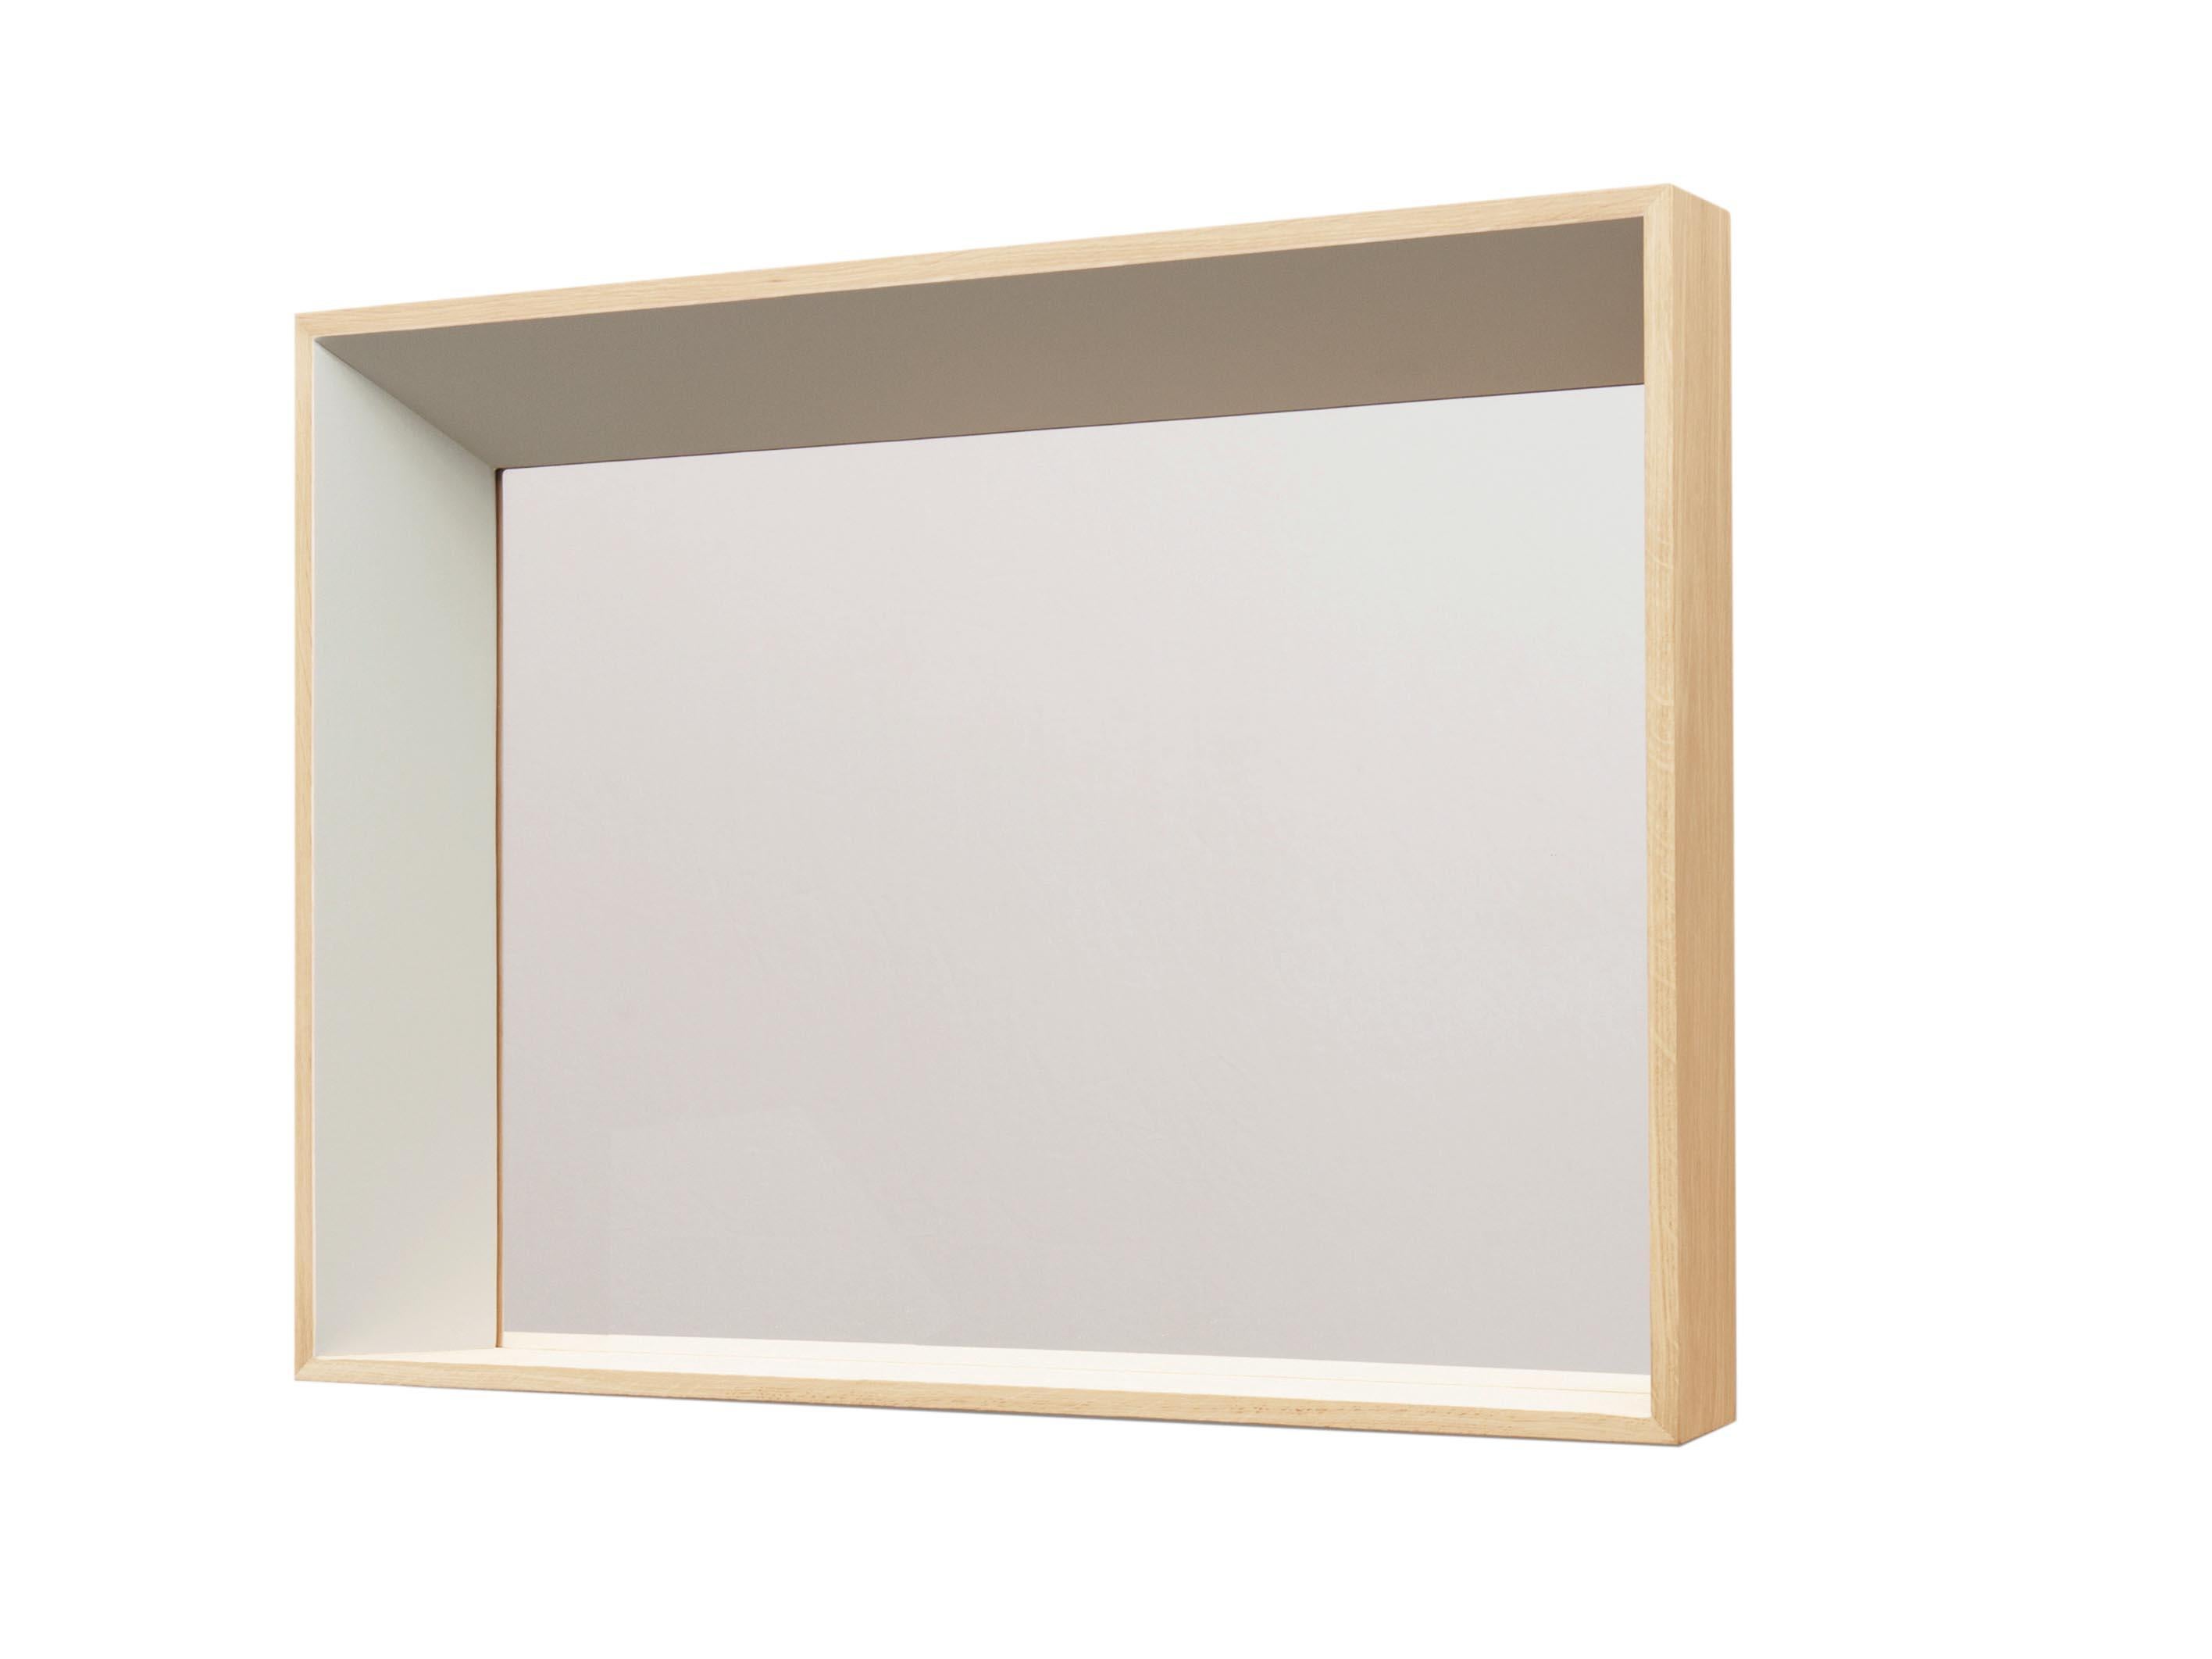 The BISO mirror plays on a perspective effect; 2 sides are bevelled at 45° degrees, giving a depth effect. Available with a right or left version, the BISO mirrors can be displayed by 2, 3 or even 4 to design a quirky window. Its depth enables to